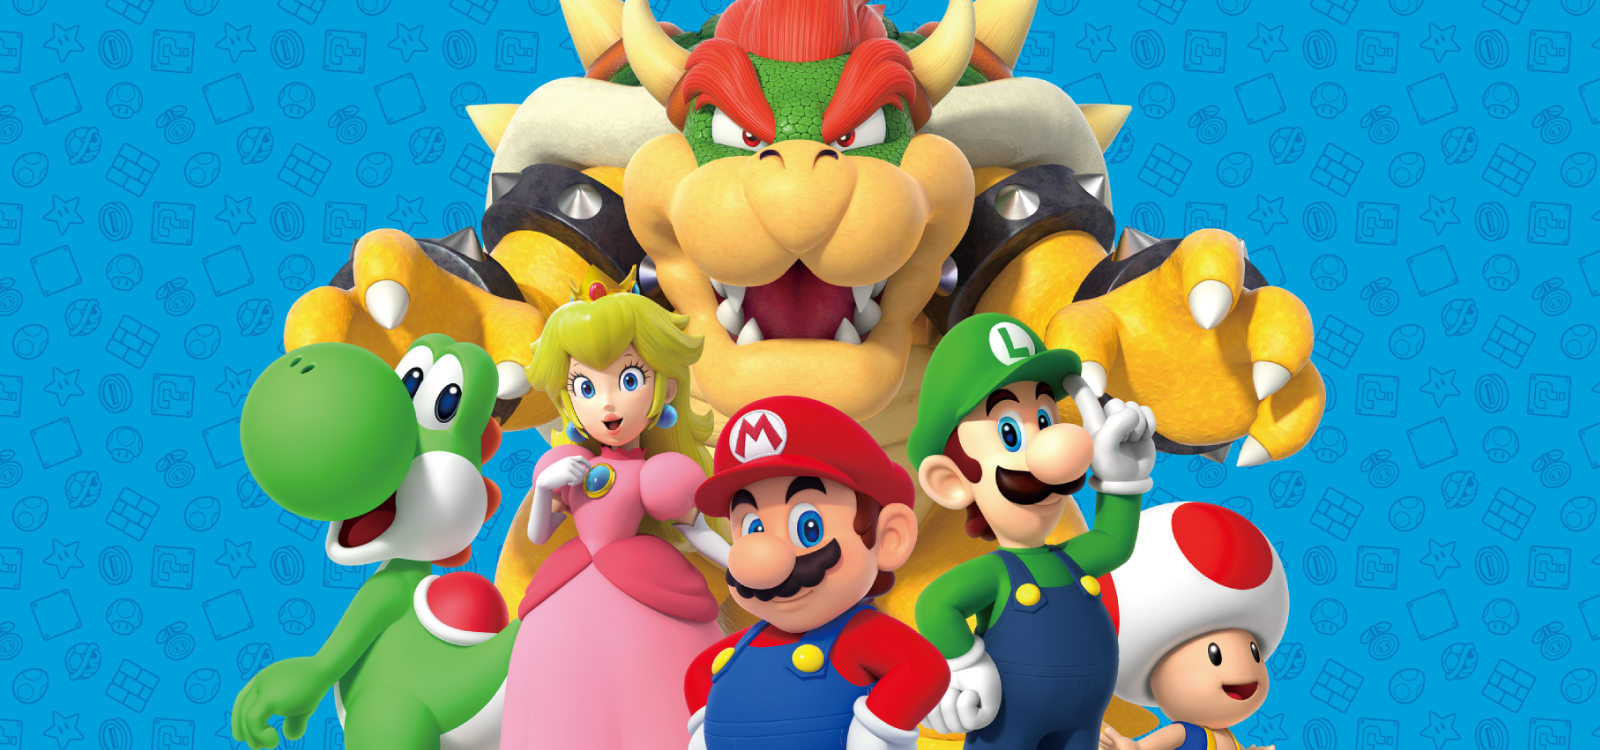 Characters from the Super Mario games available for Nintendo Switch. The background is light blue.